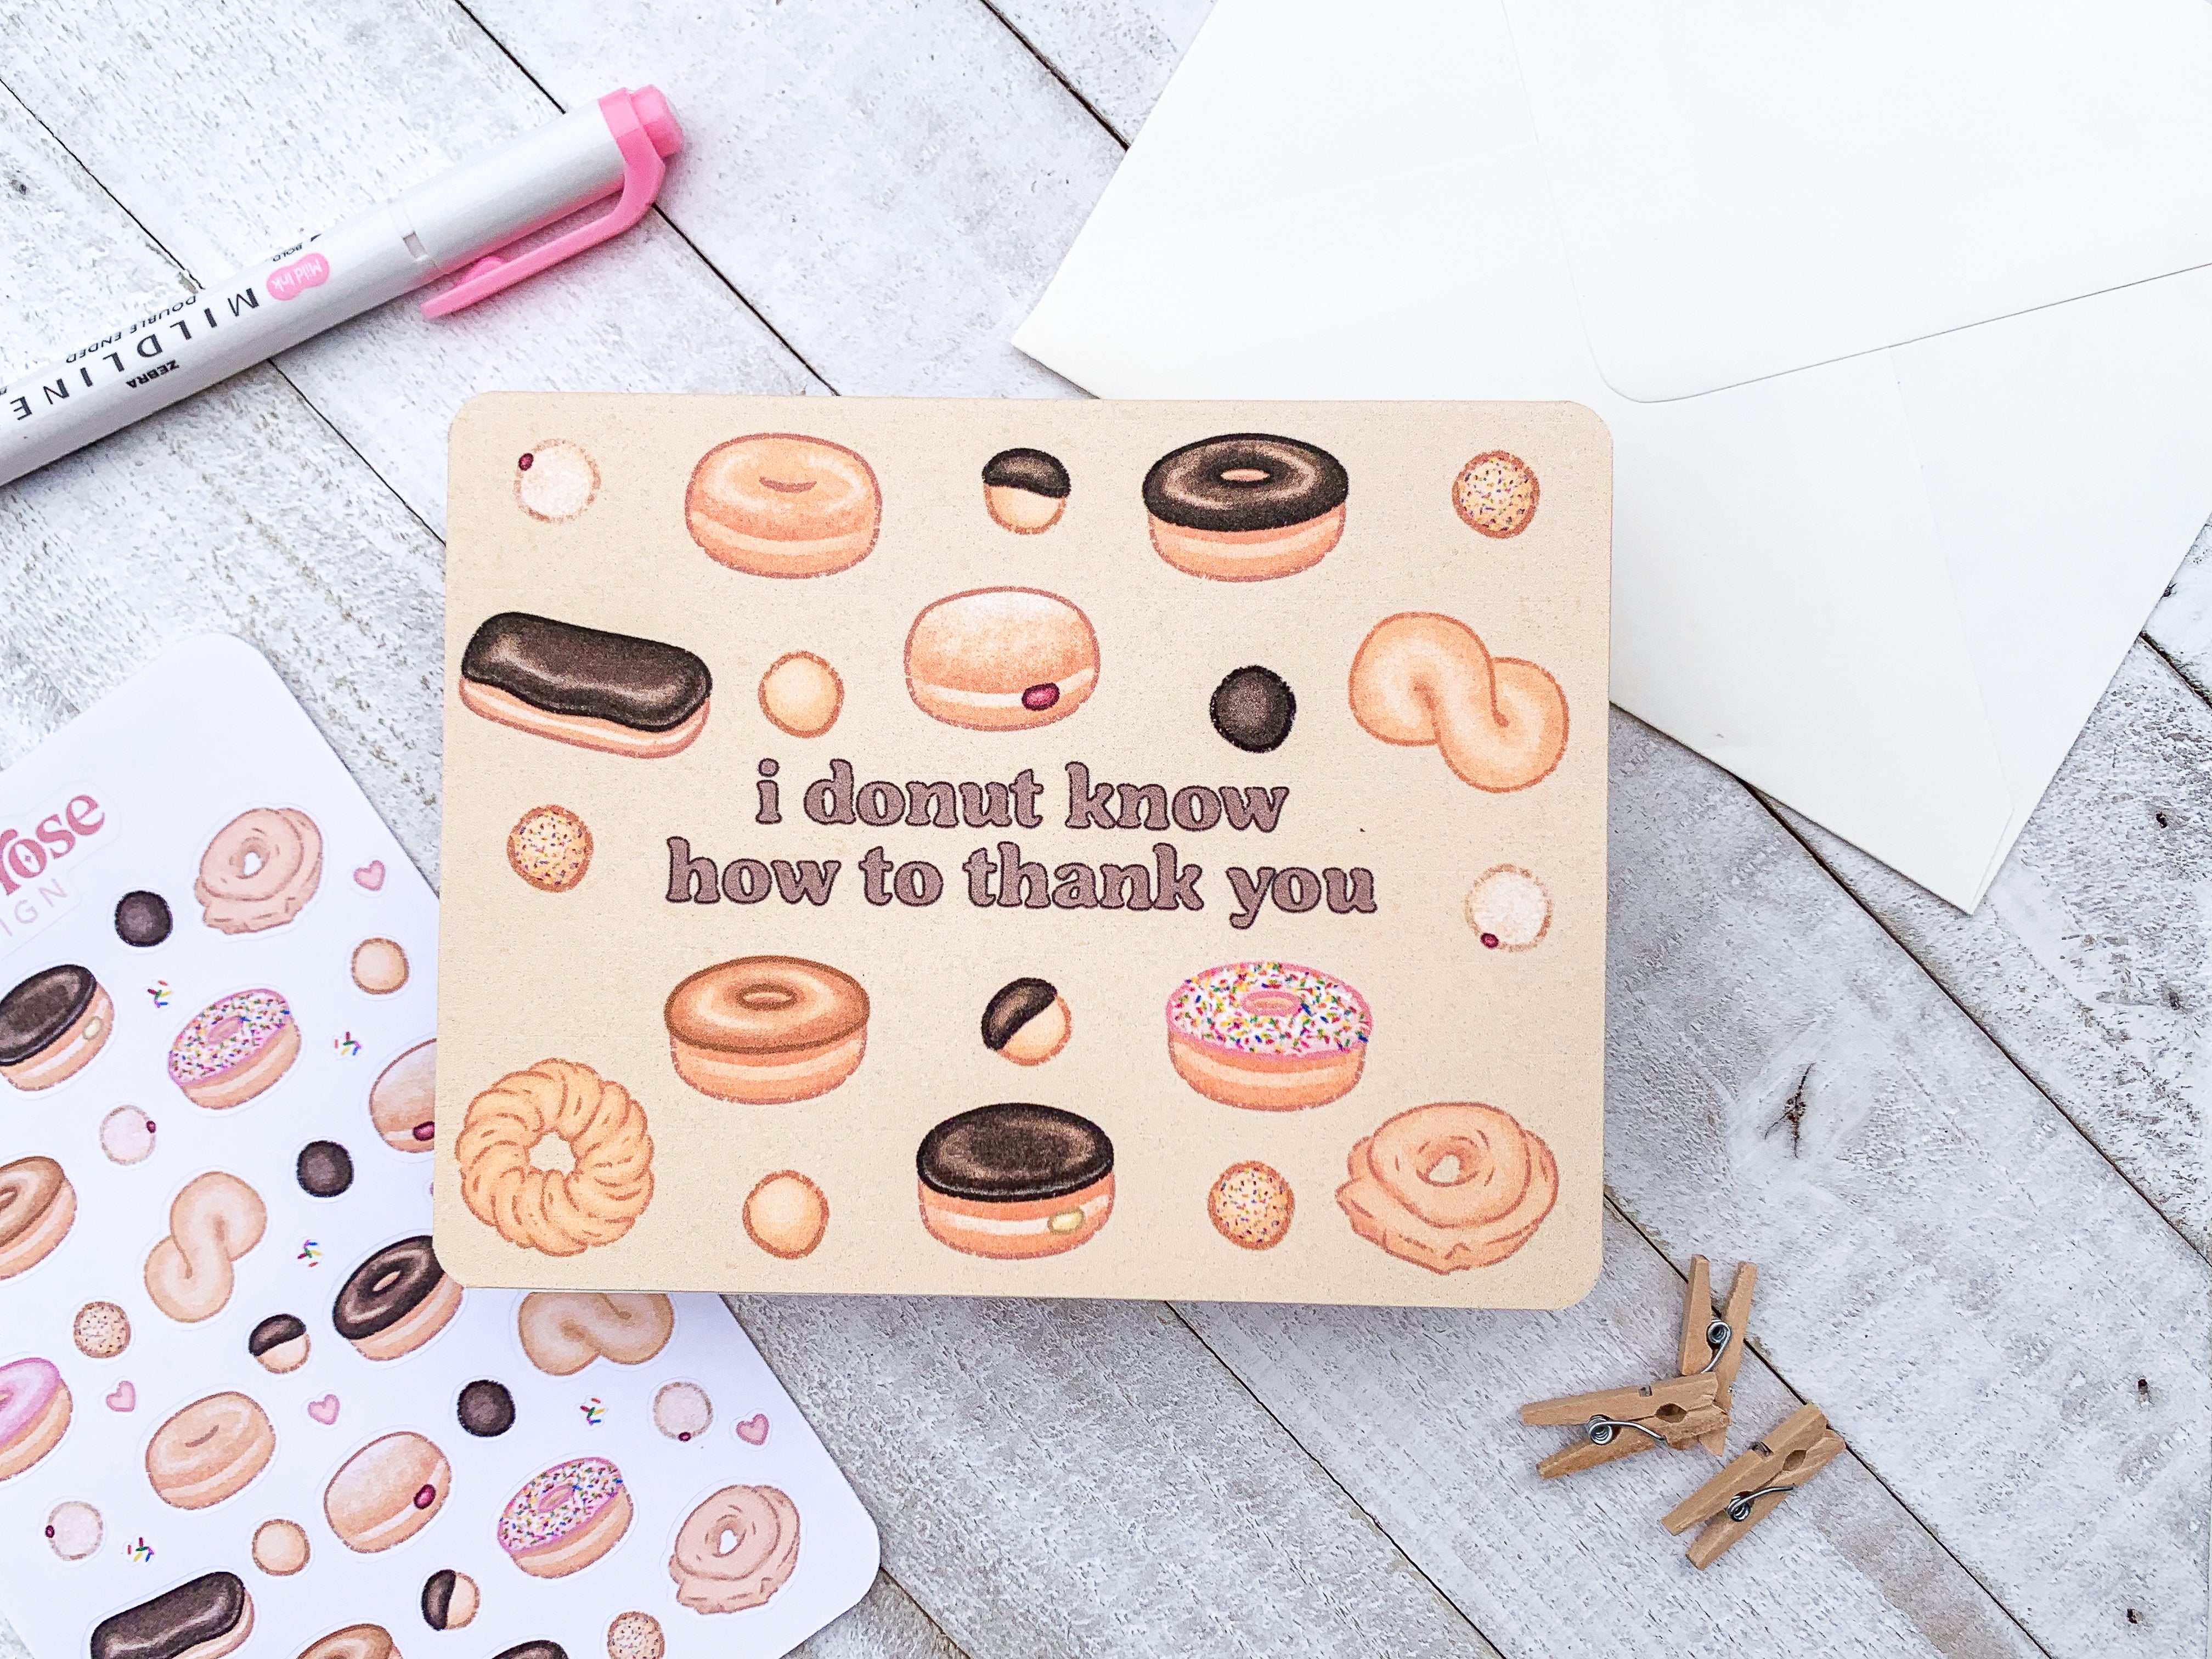 "I Donut Know What I'd Do Without You" Greeting Card